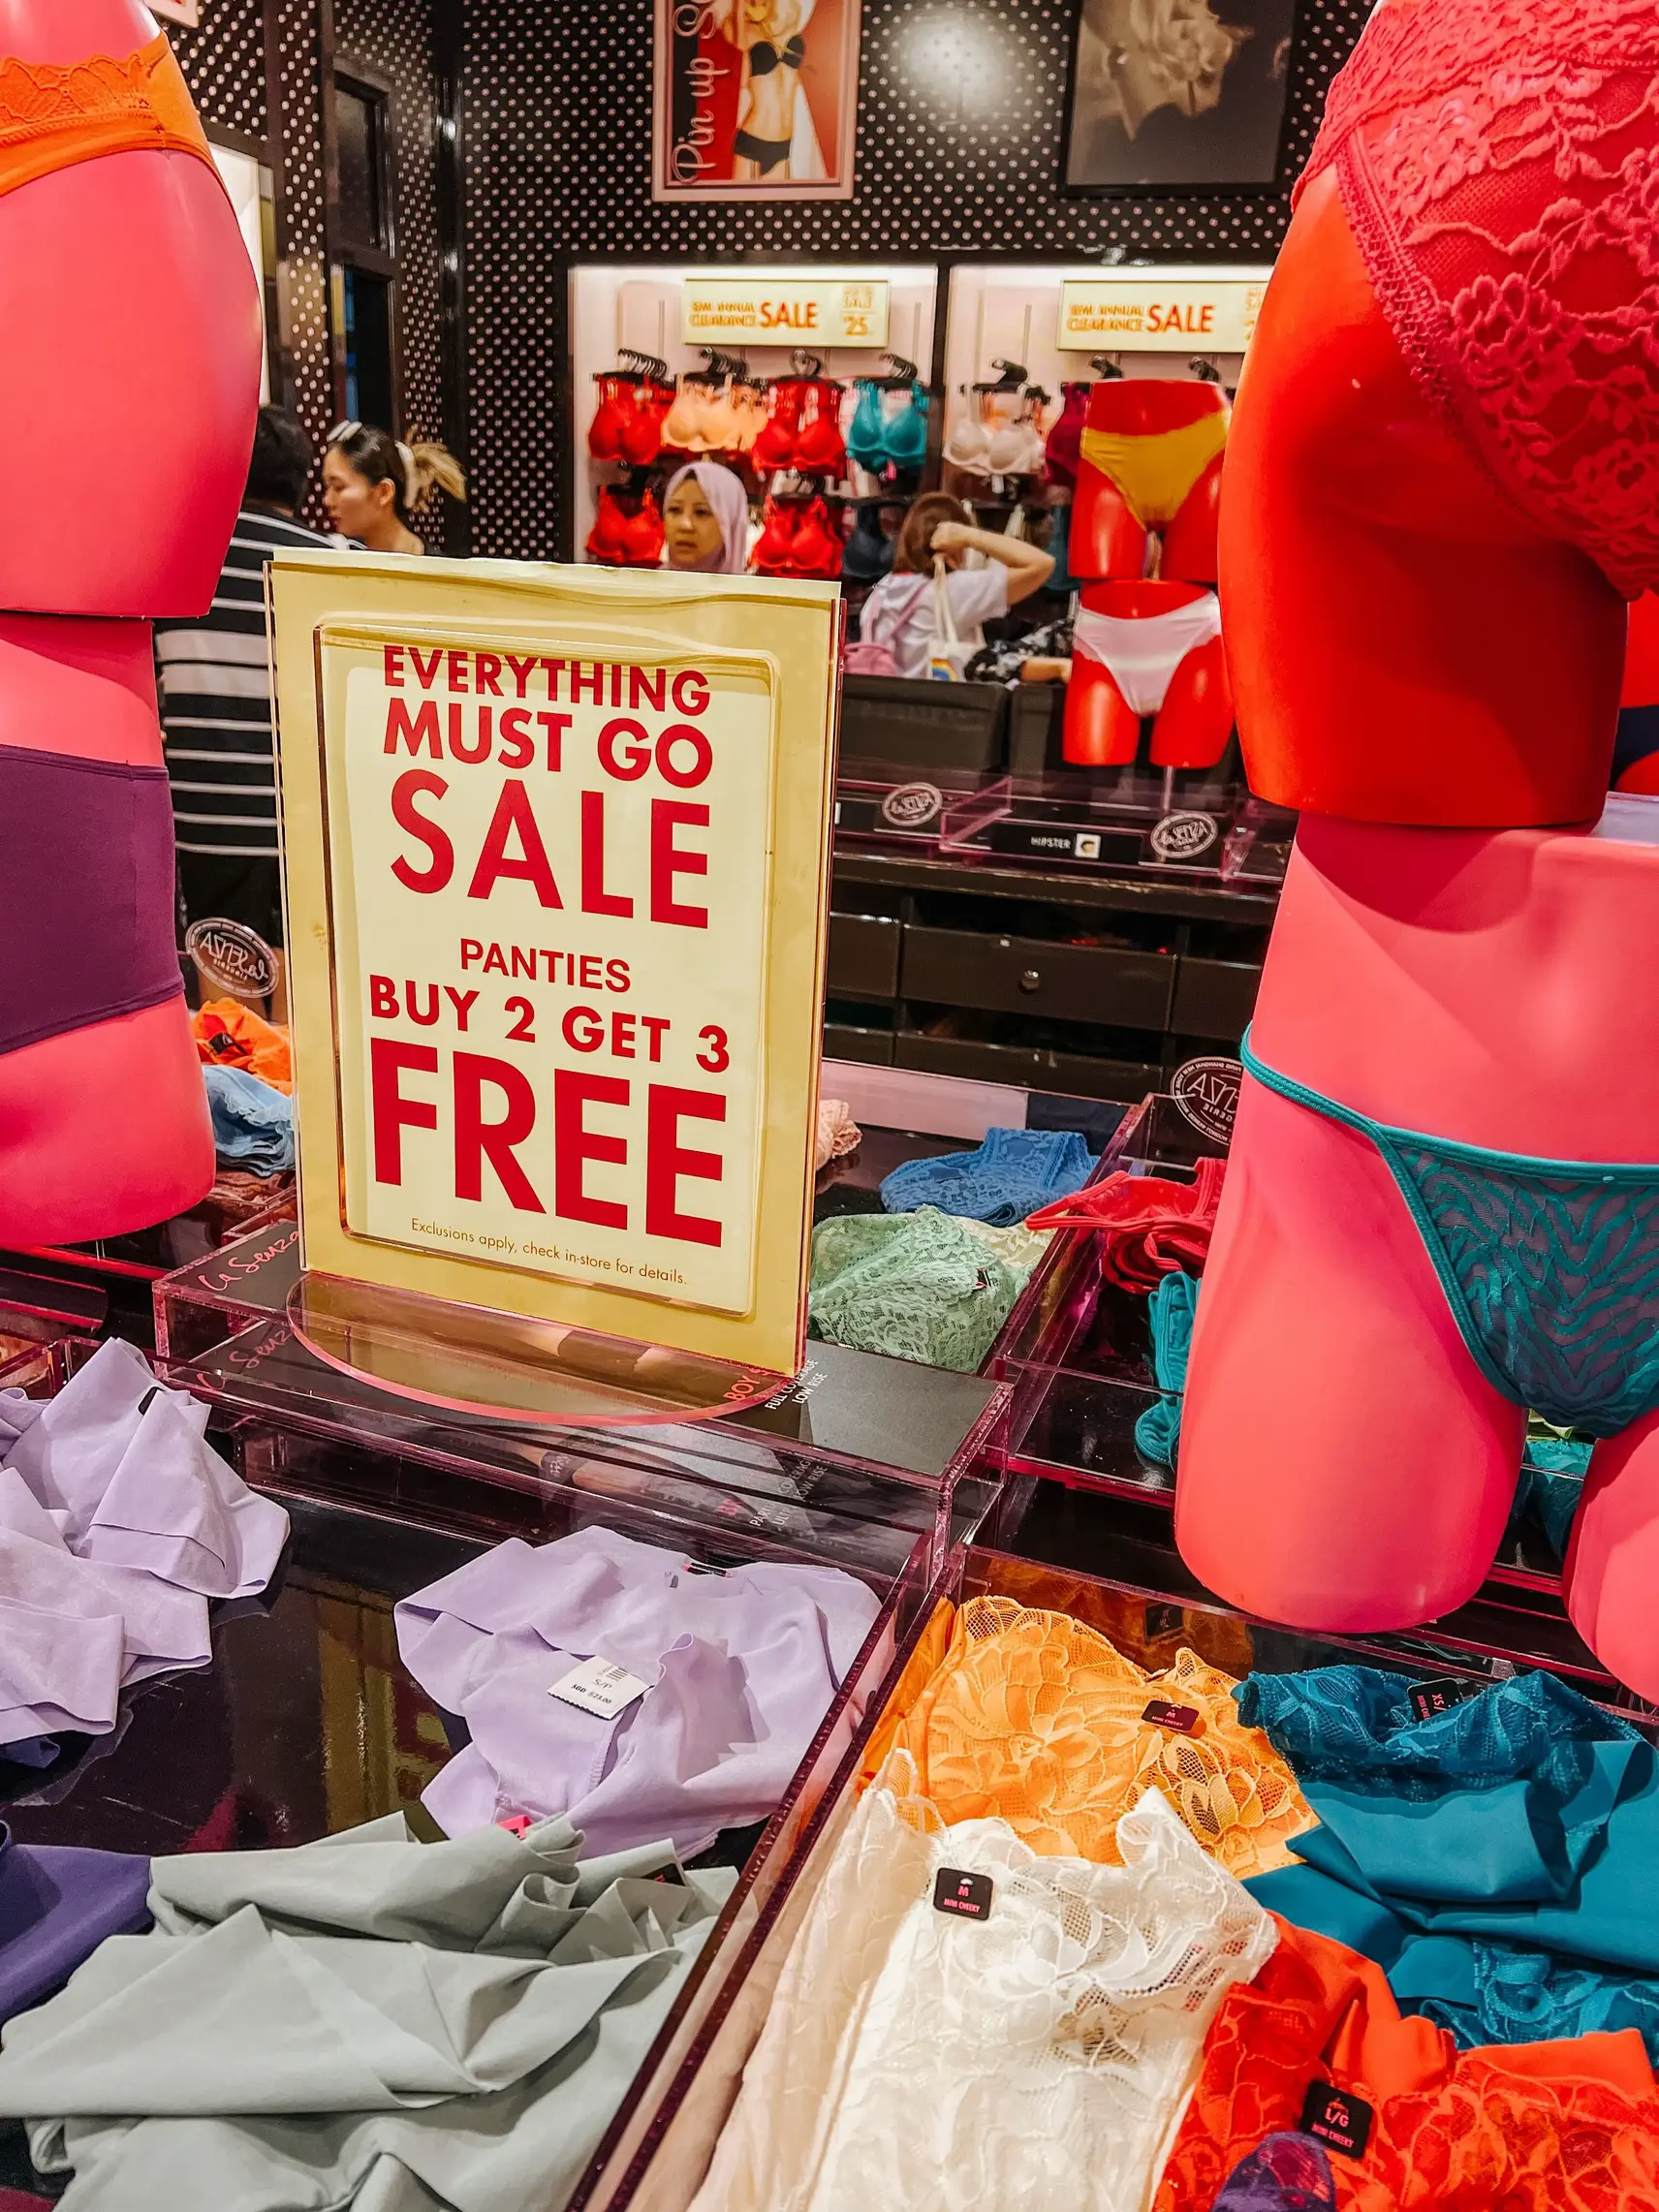 Victoria's Secret Heaven: Clearance Sale!! All Item Must Go!